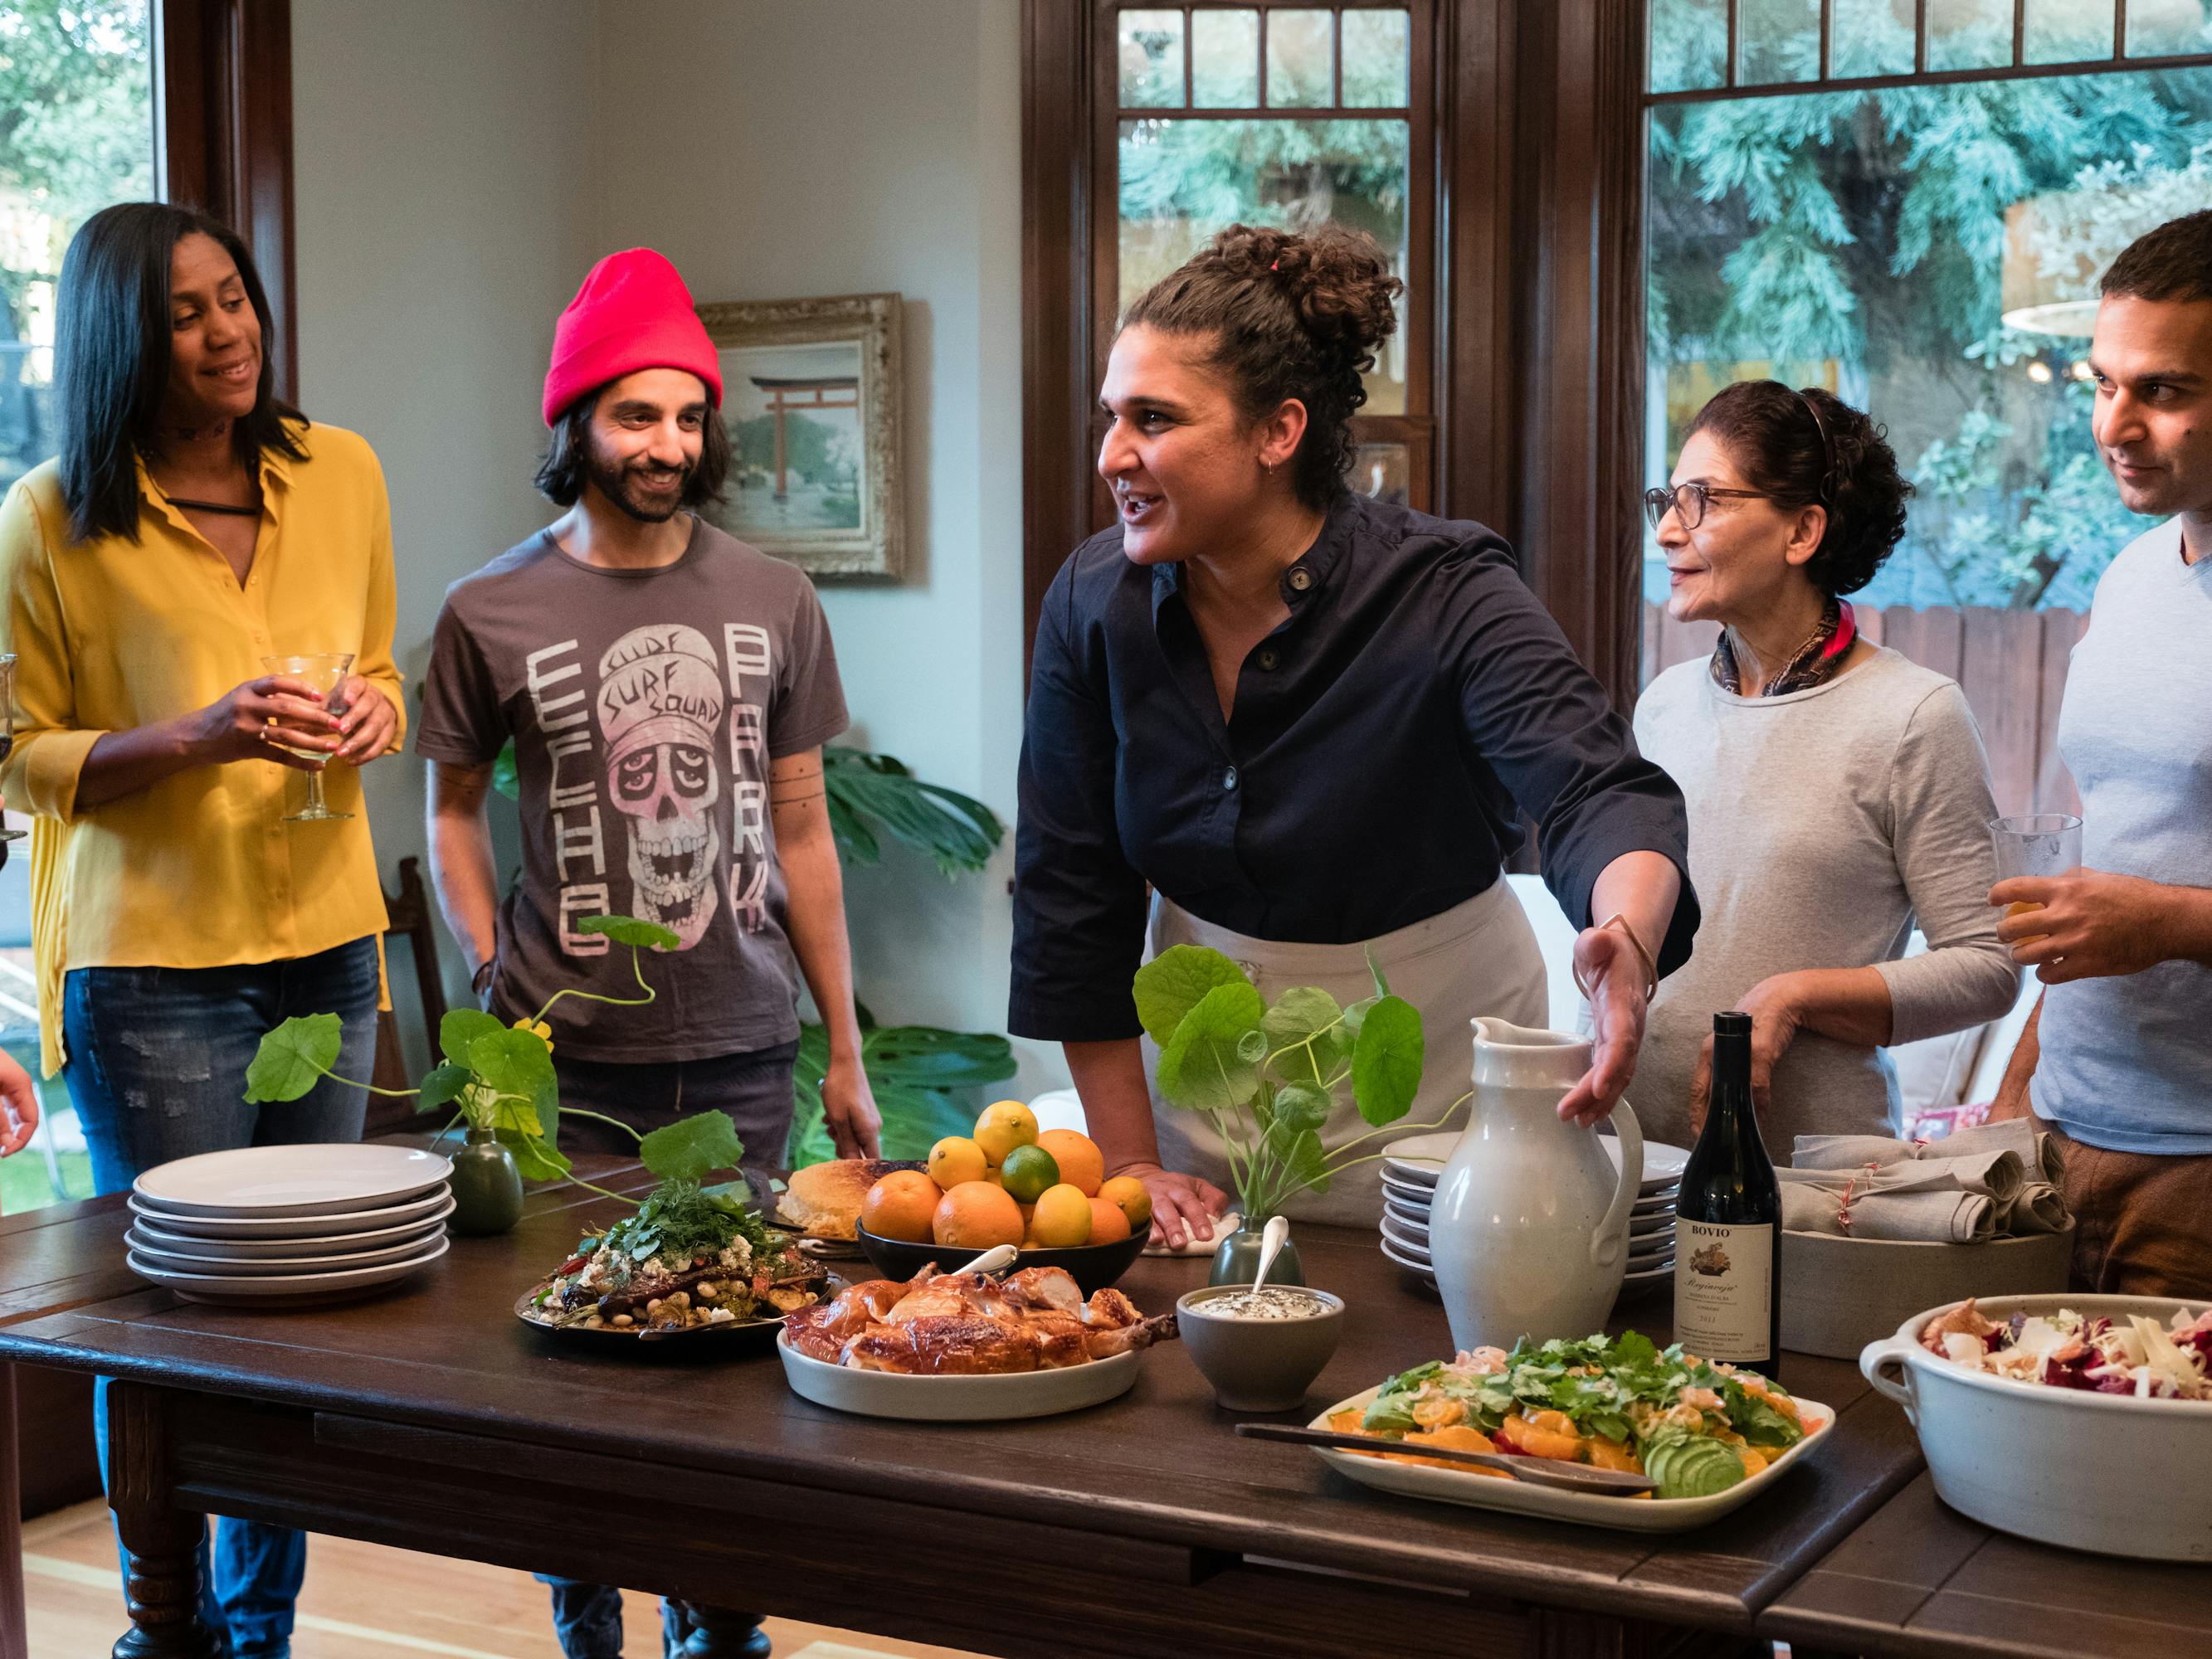 Samin Nosrat stands around a table with five others gesturing to some of the dishes.